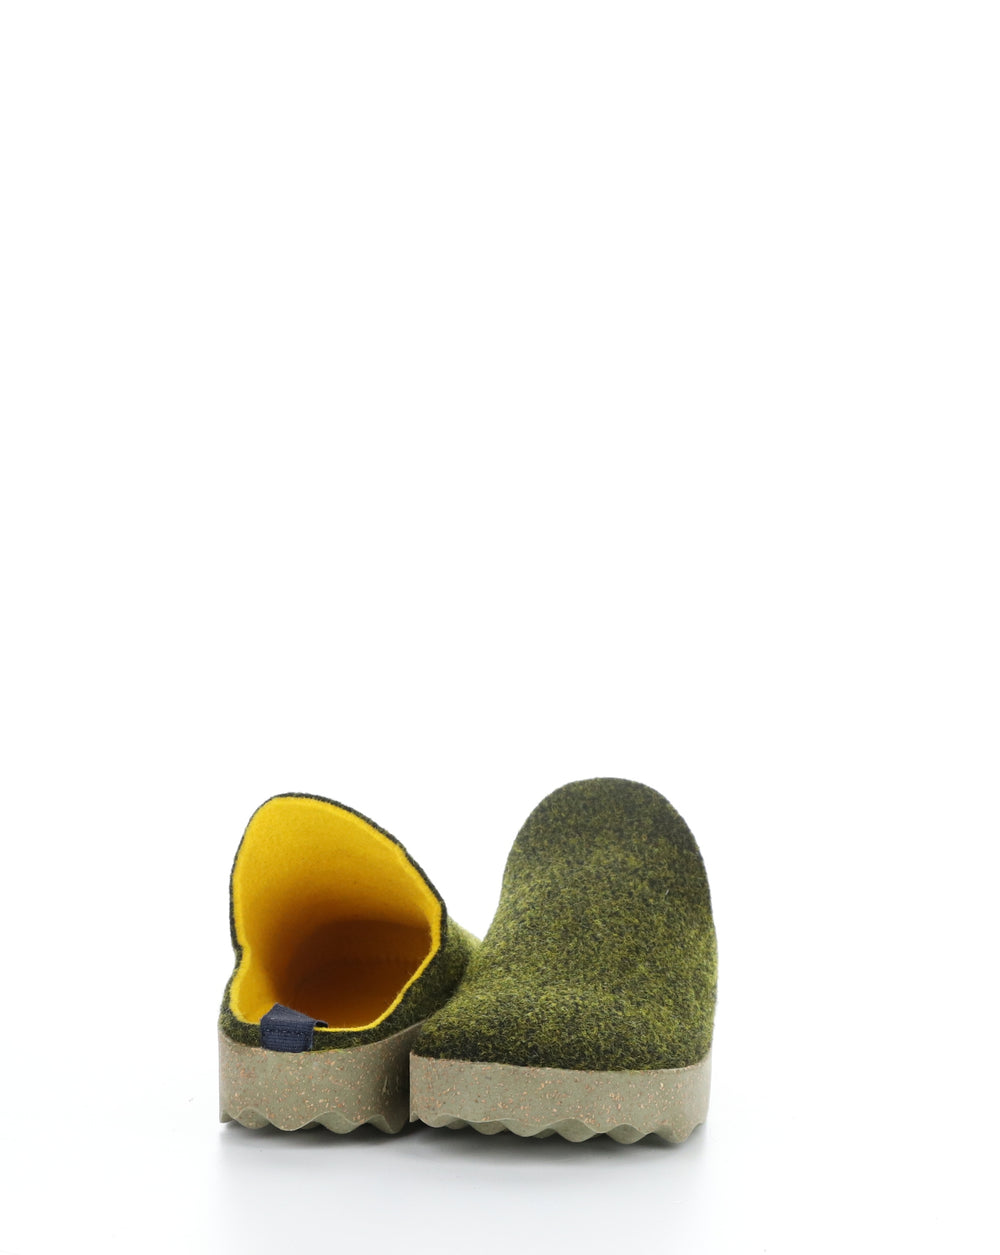 COME023ASP 075 FOREST Slip-on Mules